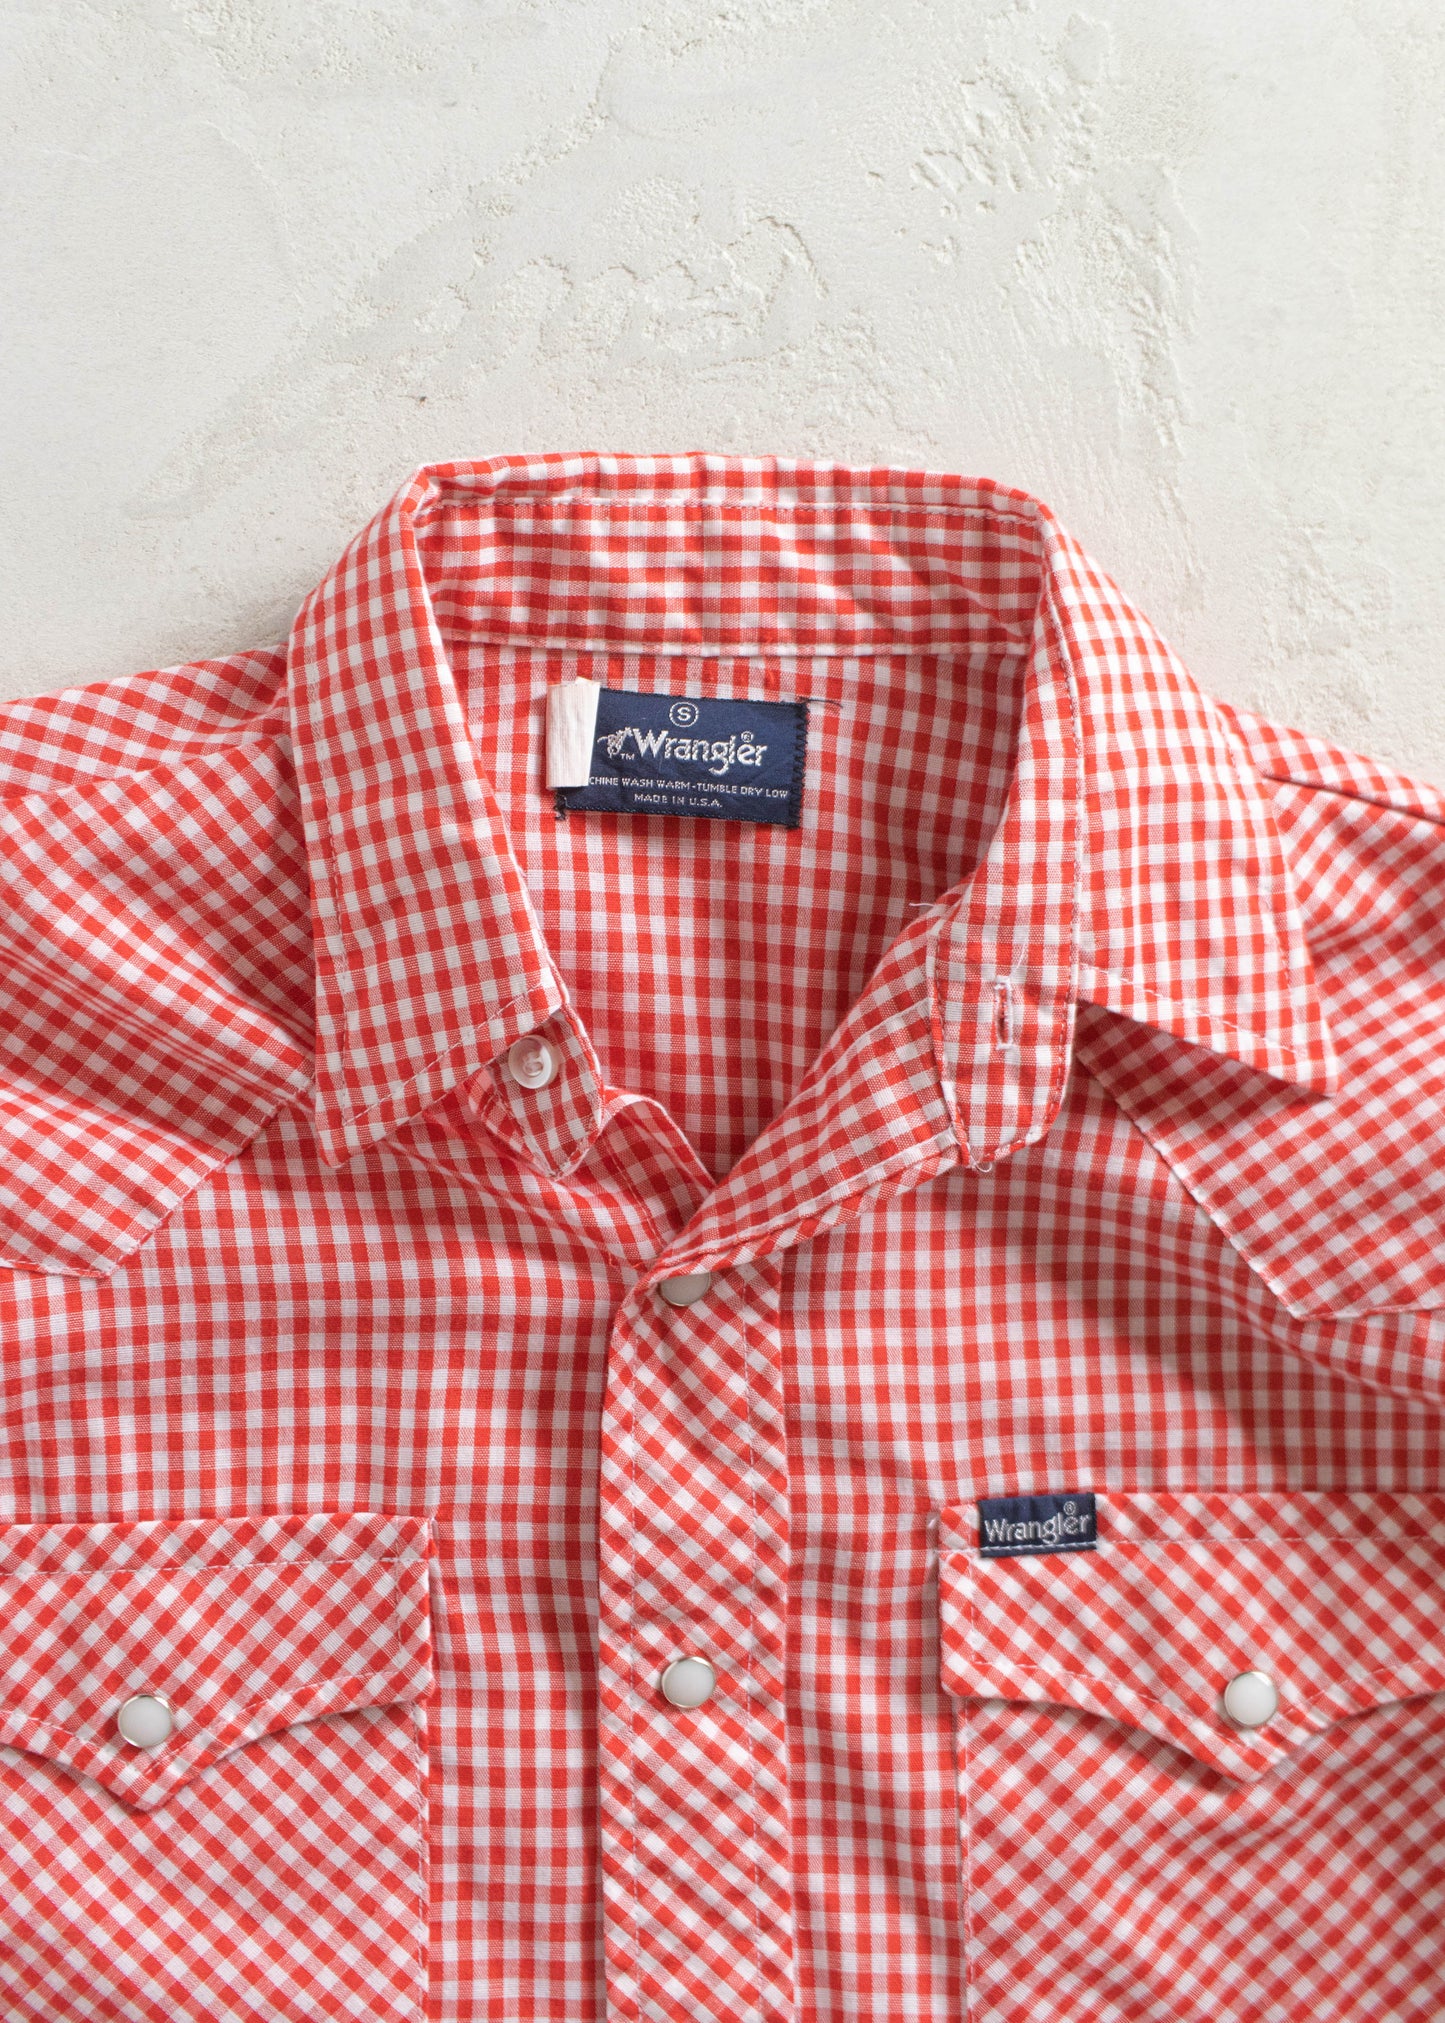 Vintage 1970s Wrangler Gingham Pattern Snap Button Shirt Size XS/S